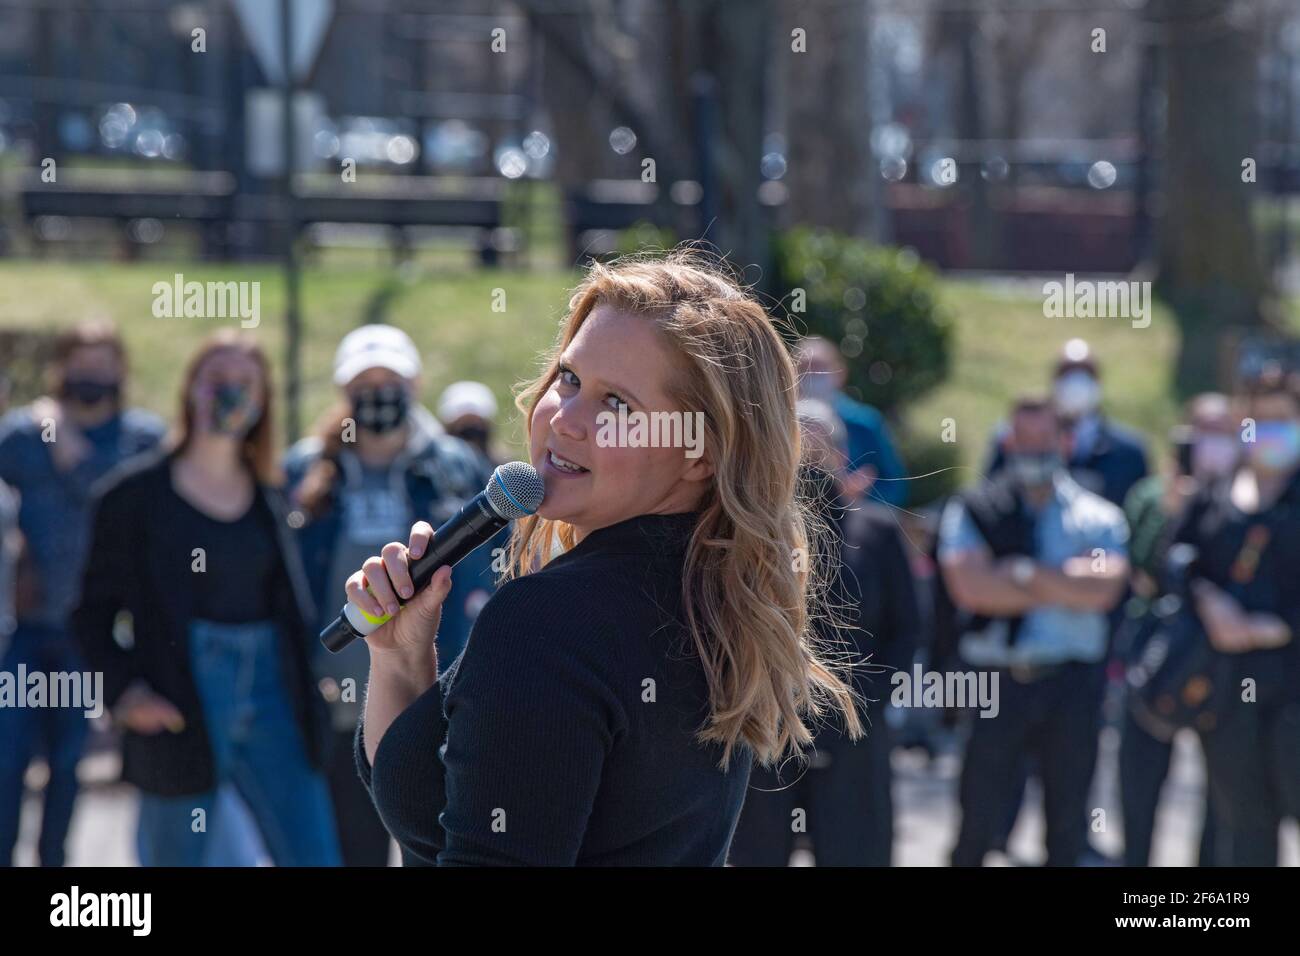 NEW YORK, NY - MARCH 30: Comedian Amy Schumer performs in Astoria Park as part of NY PopsUp on March 30, 2021 in Queens Borough of New York City. NY PopsUp is an ongoing festival with hundreds of pop-up performances around New York City that will continue through September 6, 2021. Credit: Ron Adar/Alamy Live News Stock Photo